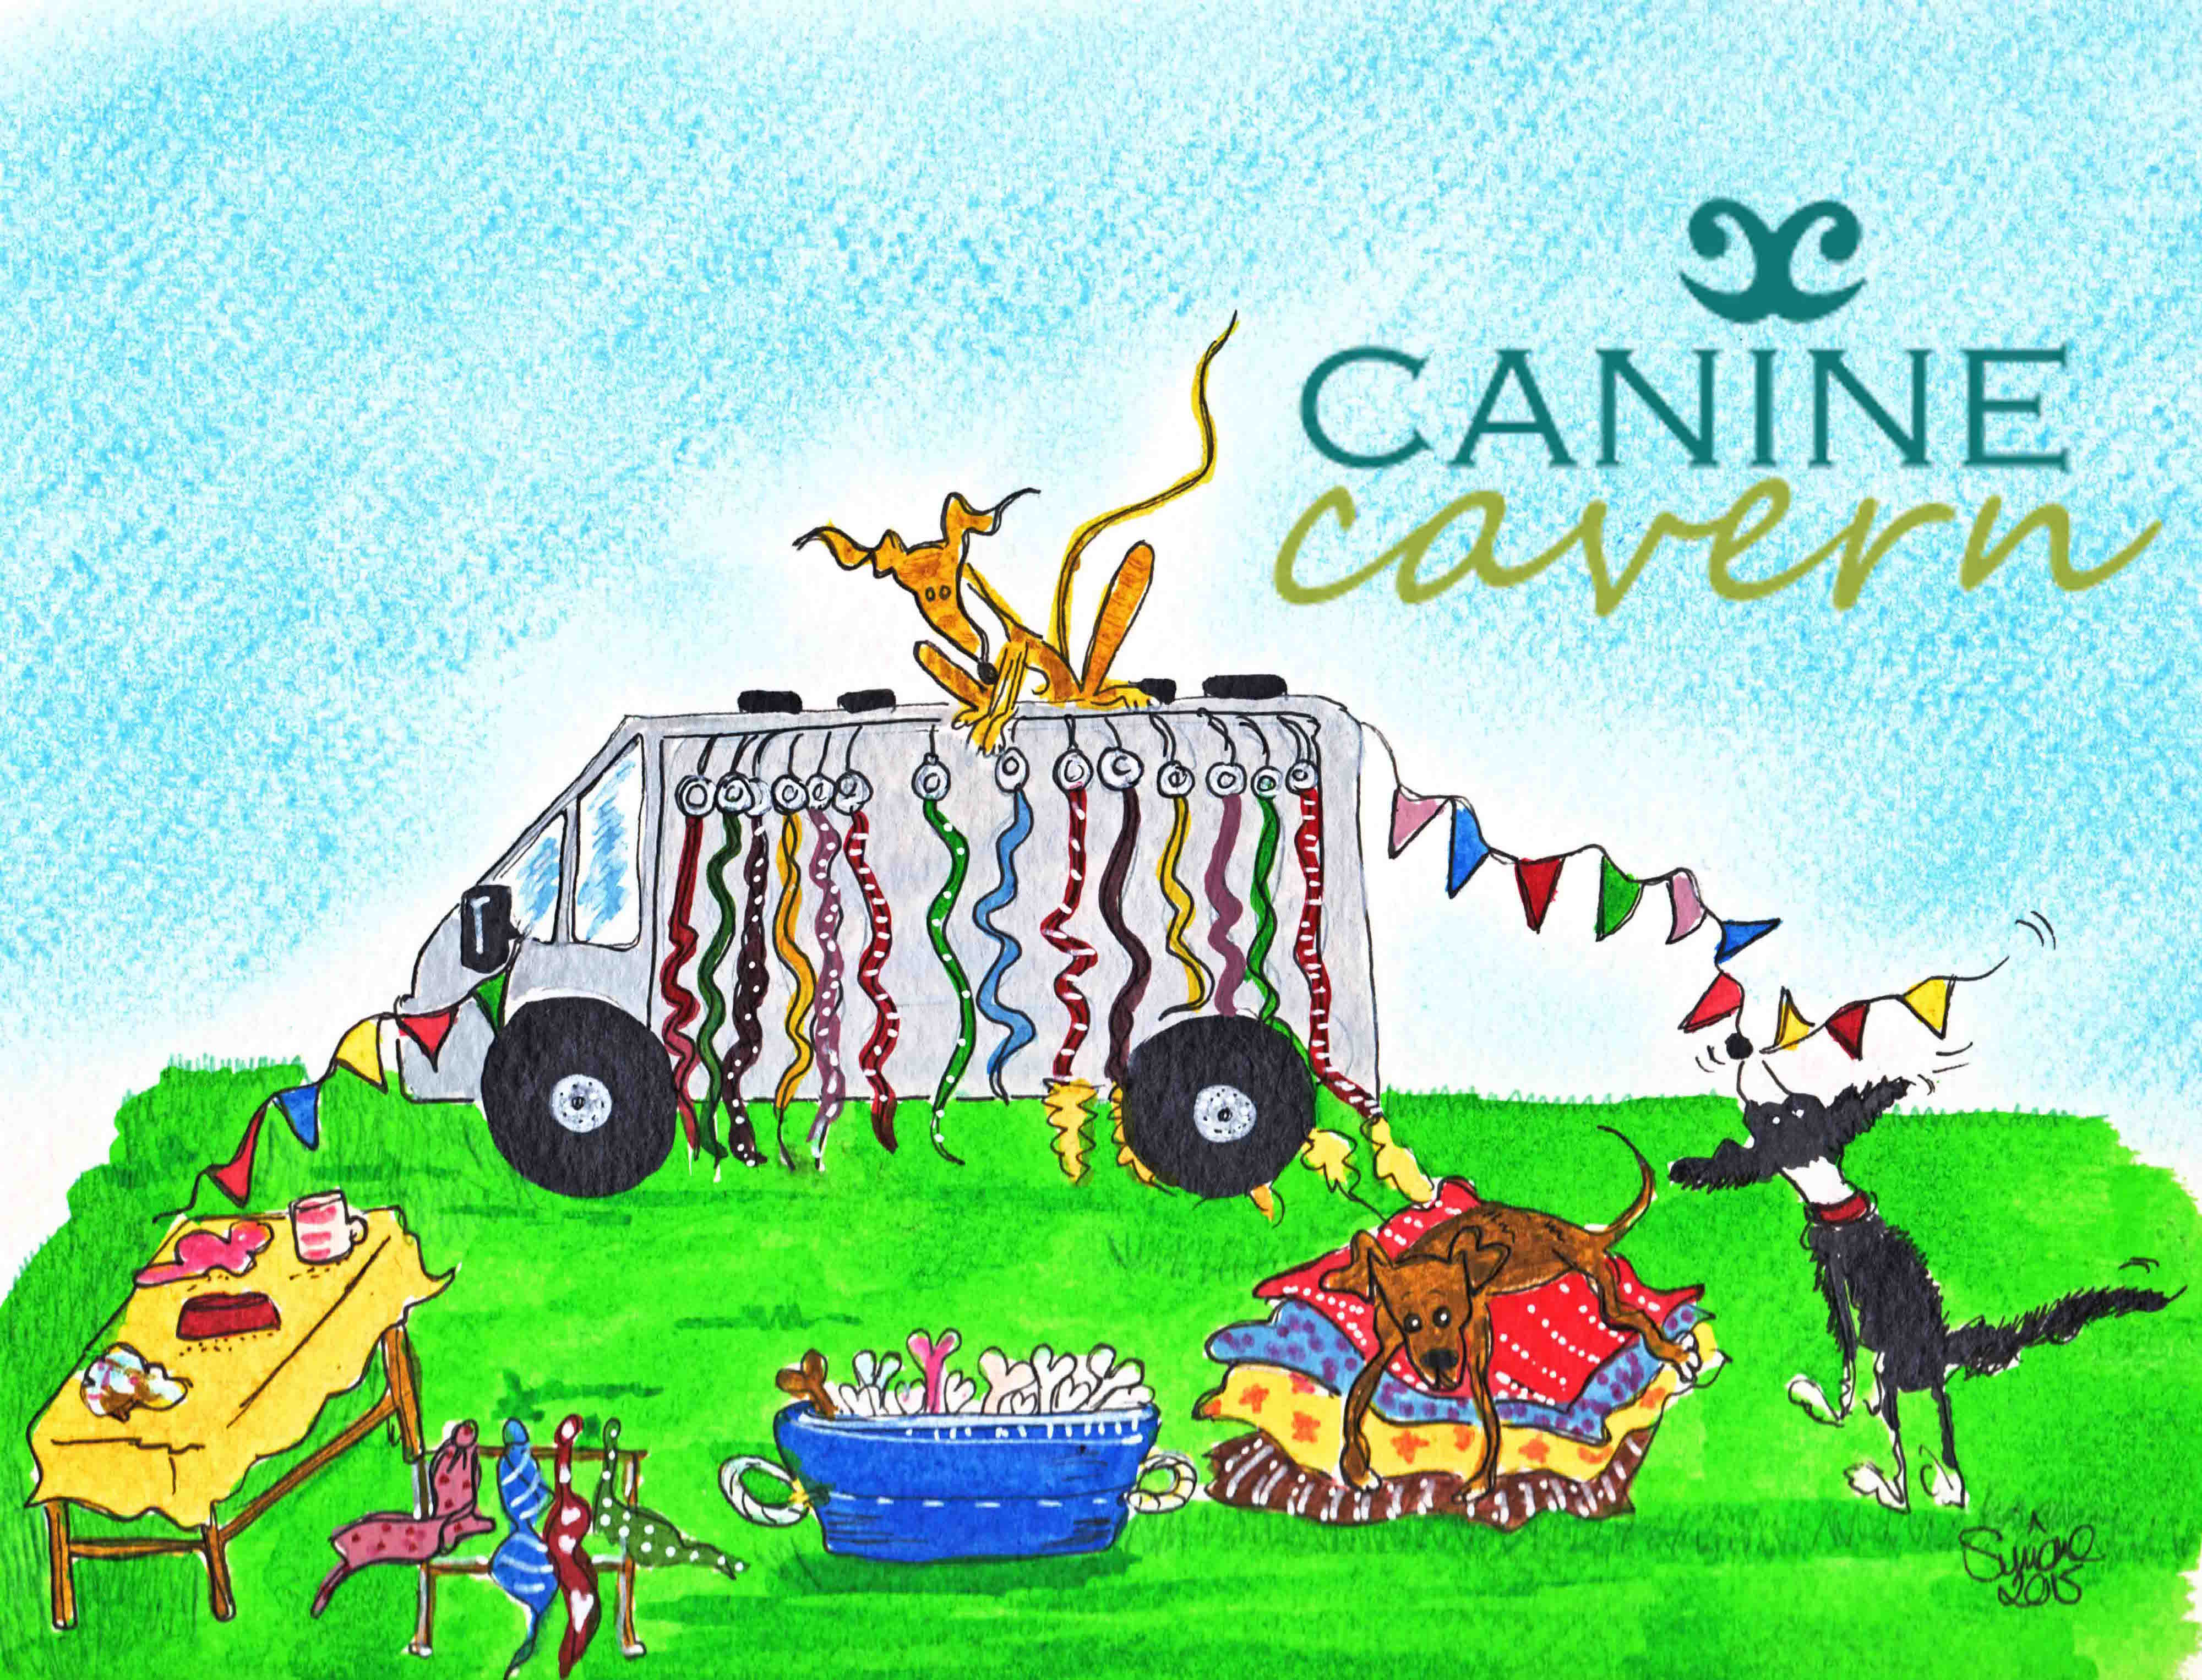 Canine Cavern launches new website!